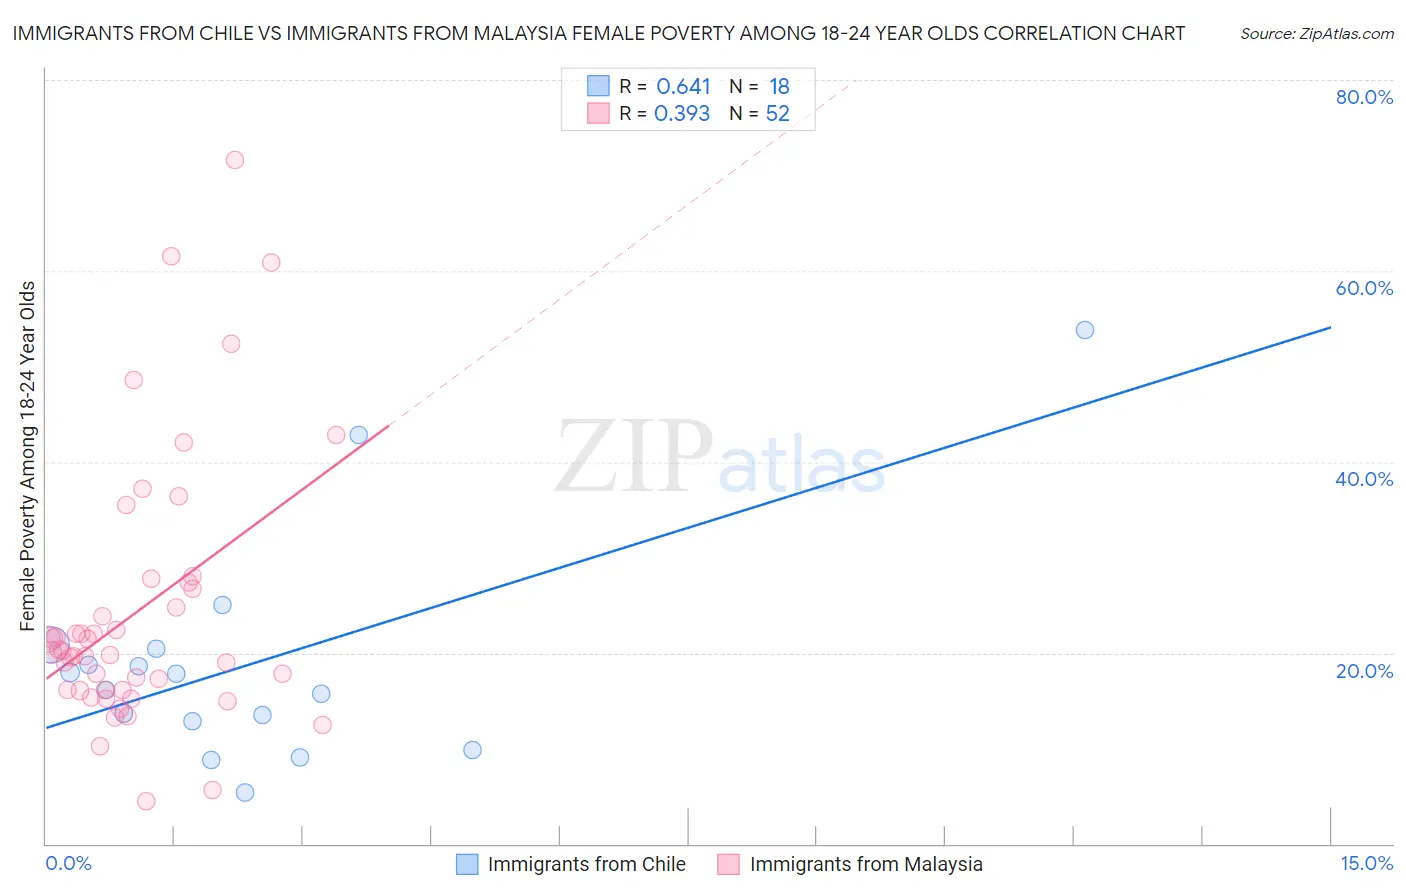 Immigrants from Chile vs Immigrants from Malaysia Female Poverty Among 18-24 Year Olds